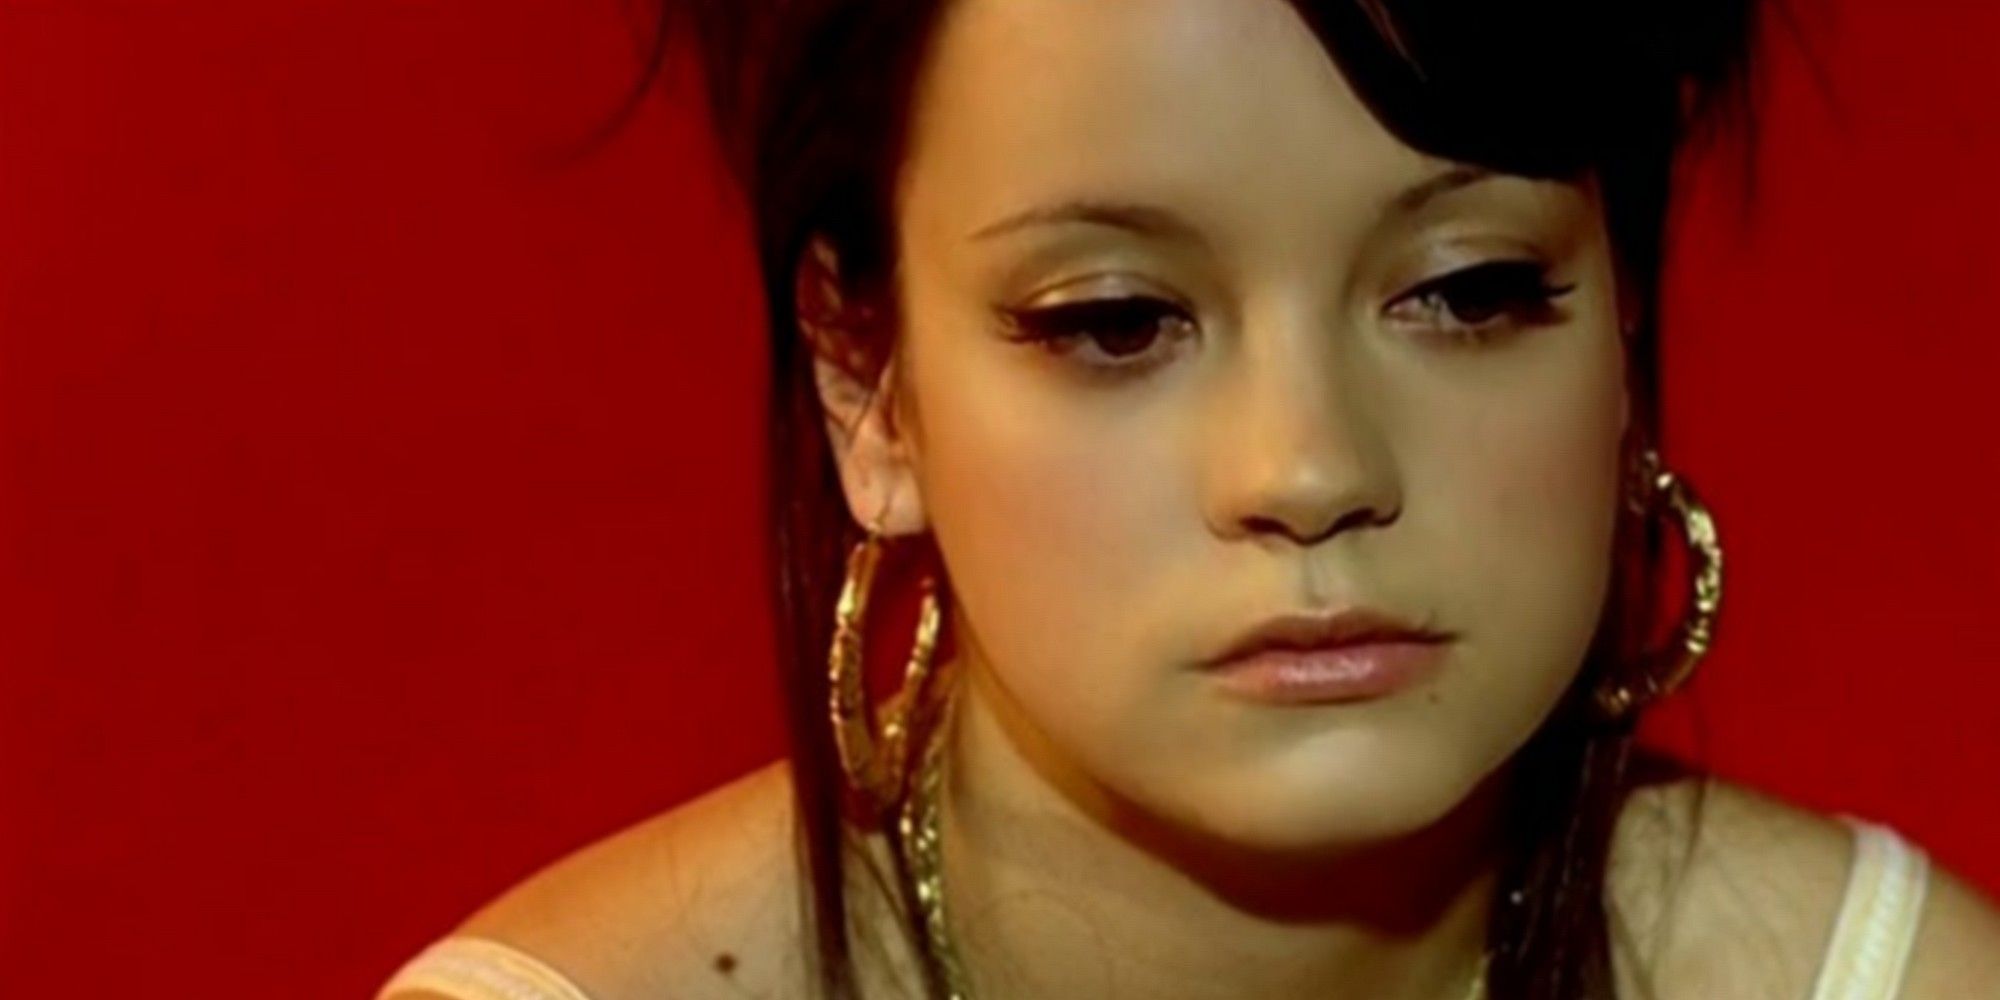 lily allen from the smile music video